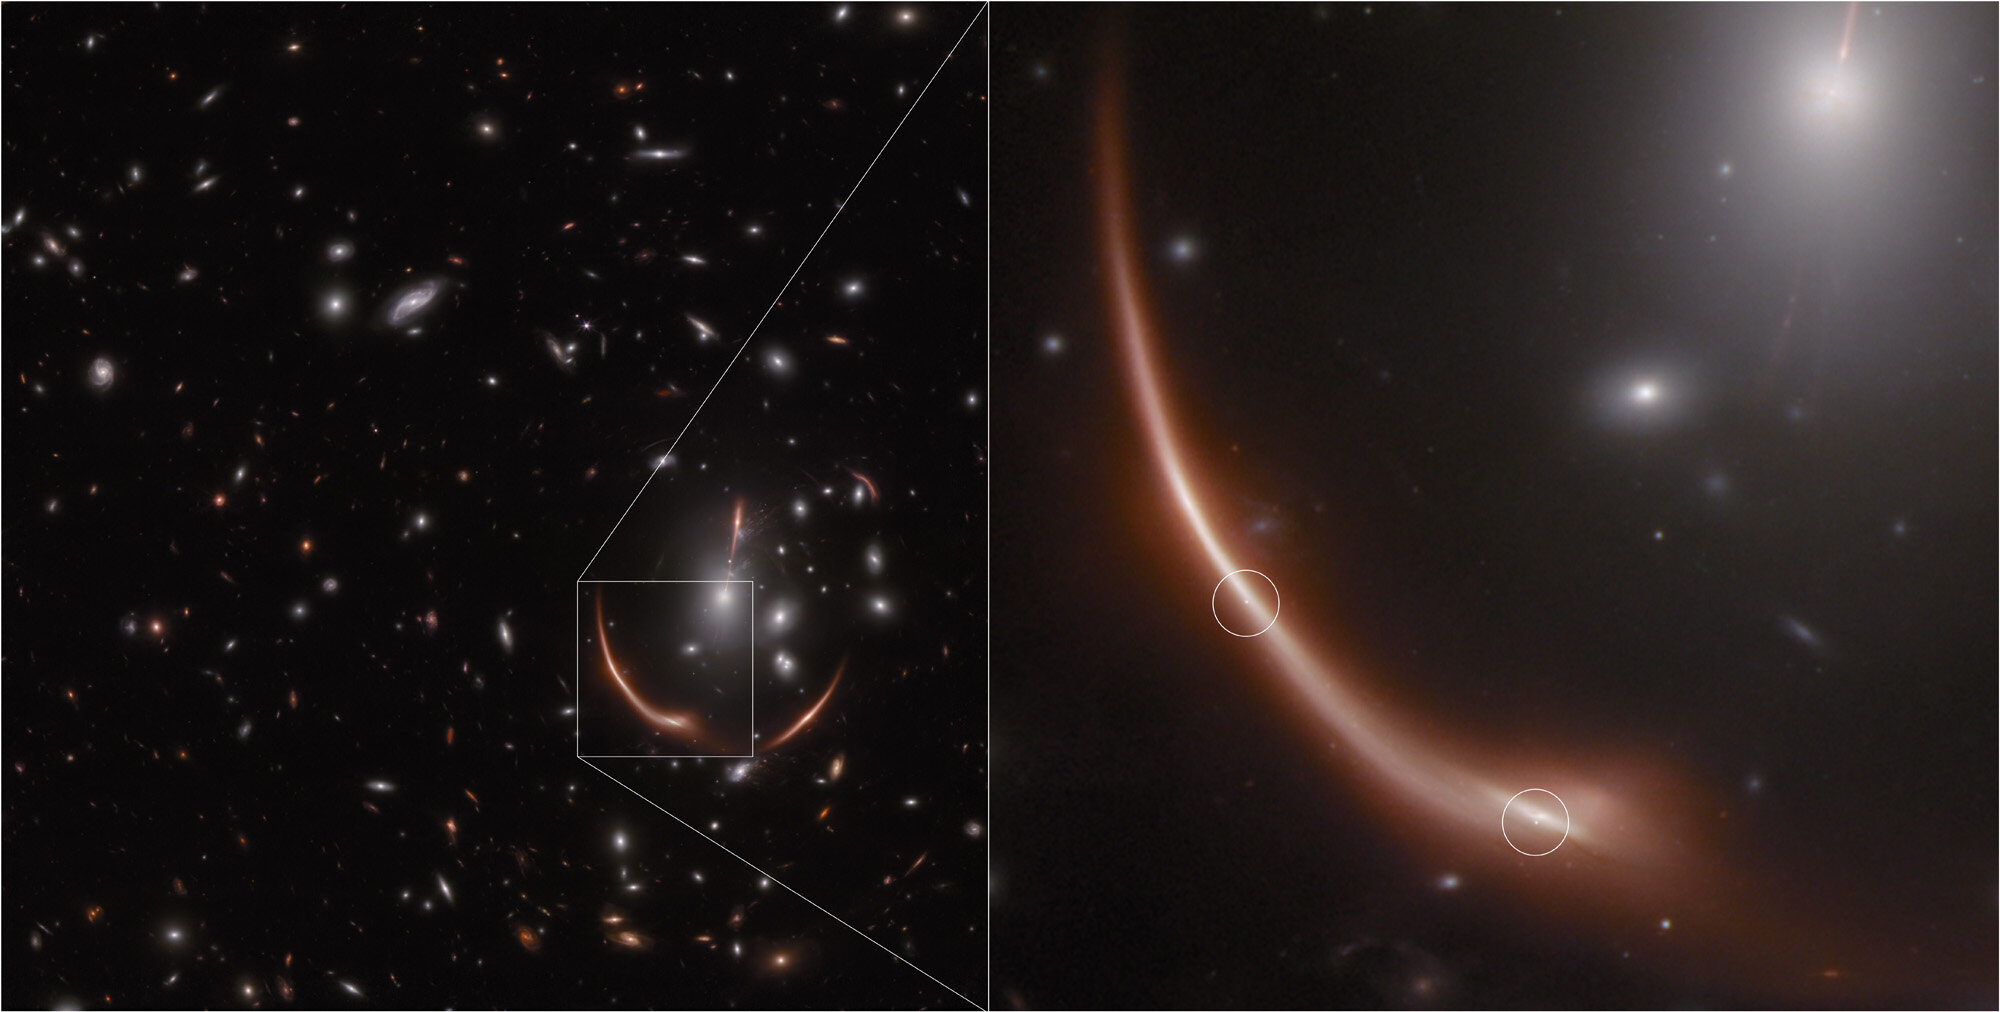 “Webb Detects Another Lens-aided Supernova in a Remote Galaxy”